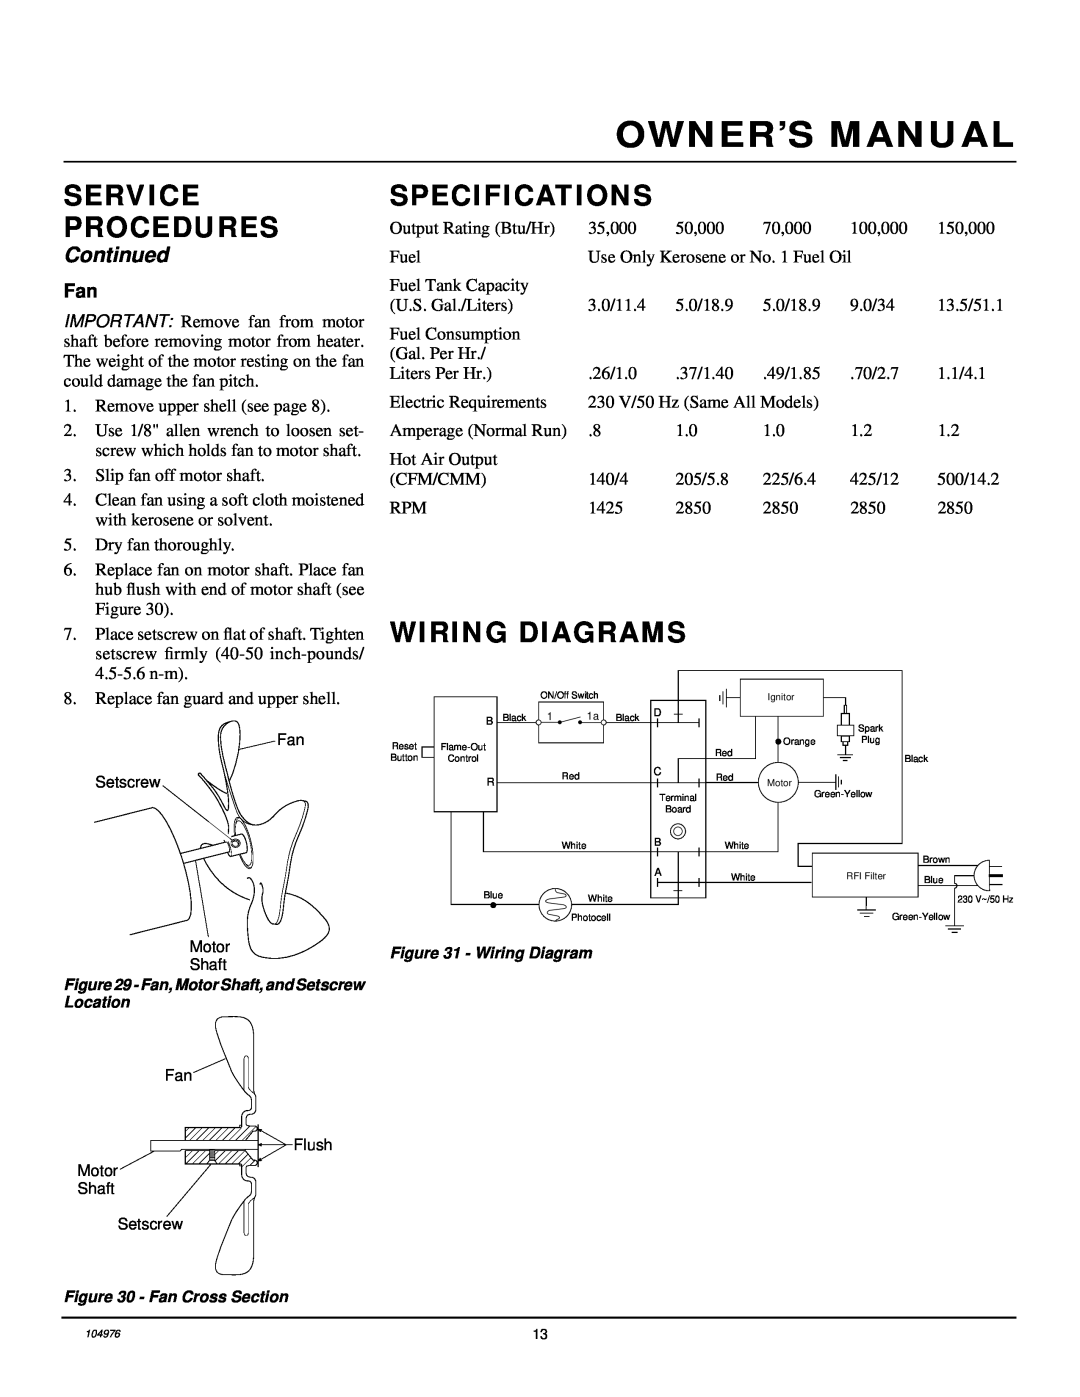 Desa NTH70, NTH150, NTH50, NTH100, NTH35 owner manual Specifications, Wiring Diagrams, Service Procedures, Continued 